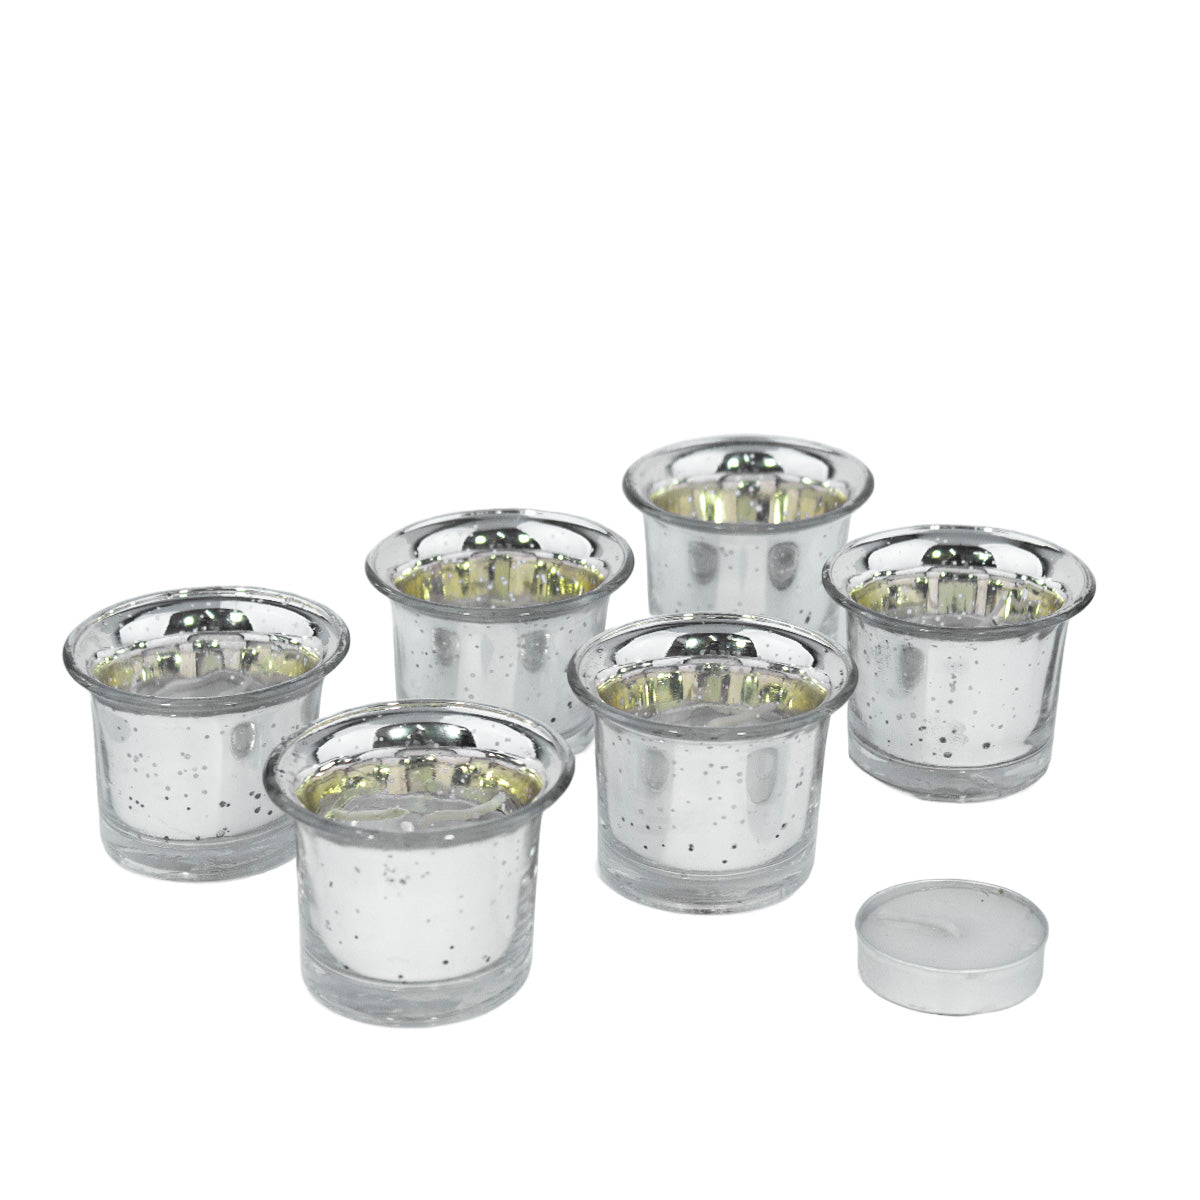 Hosley Decorative Glass Candles/ Votive Candles for Home Decor with 6 Pcs Tealights for Decoration, Pack of 6, Silver